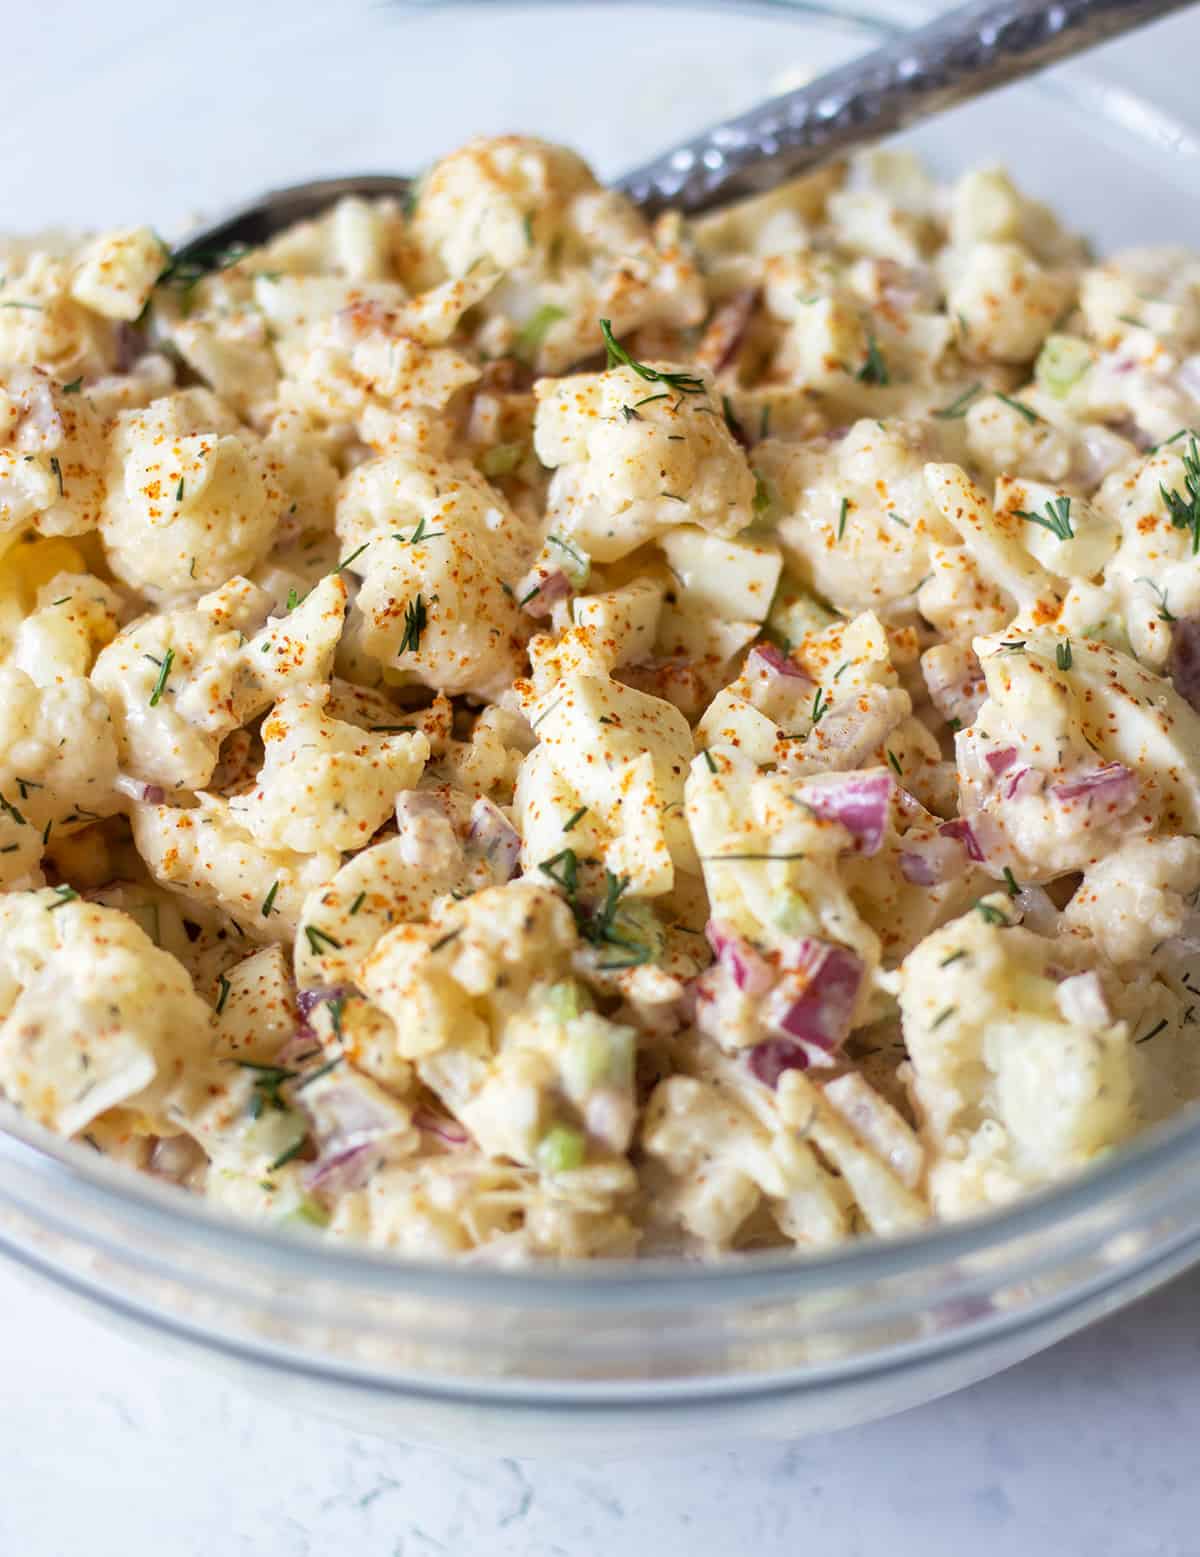 cauliflower potato salad in a clear glass bowl with a silver fork for serving.